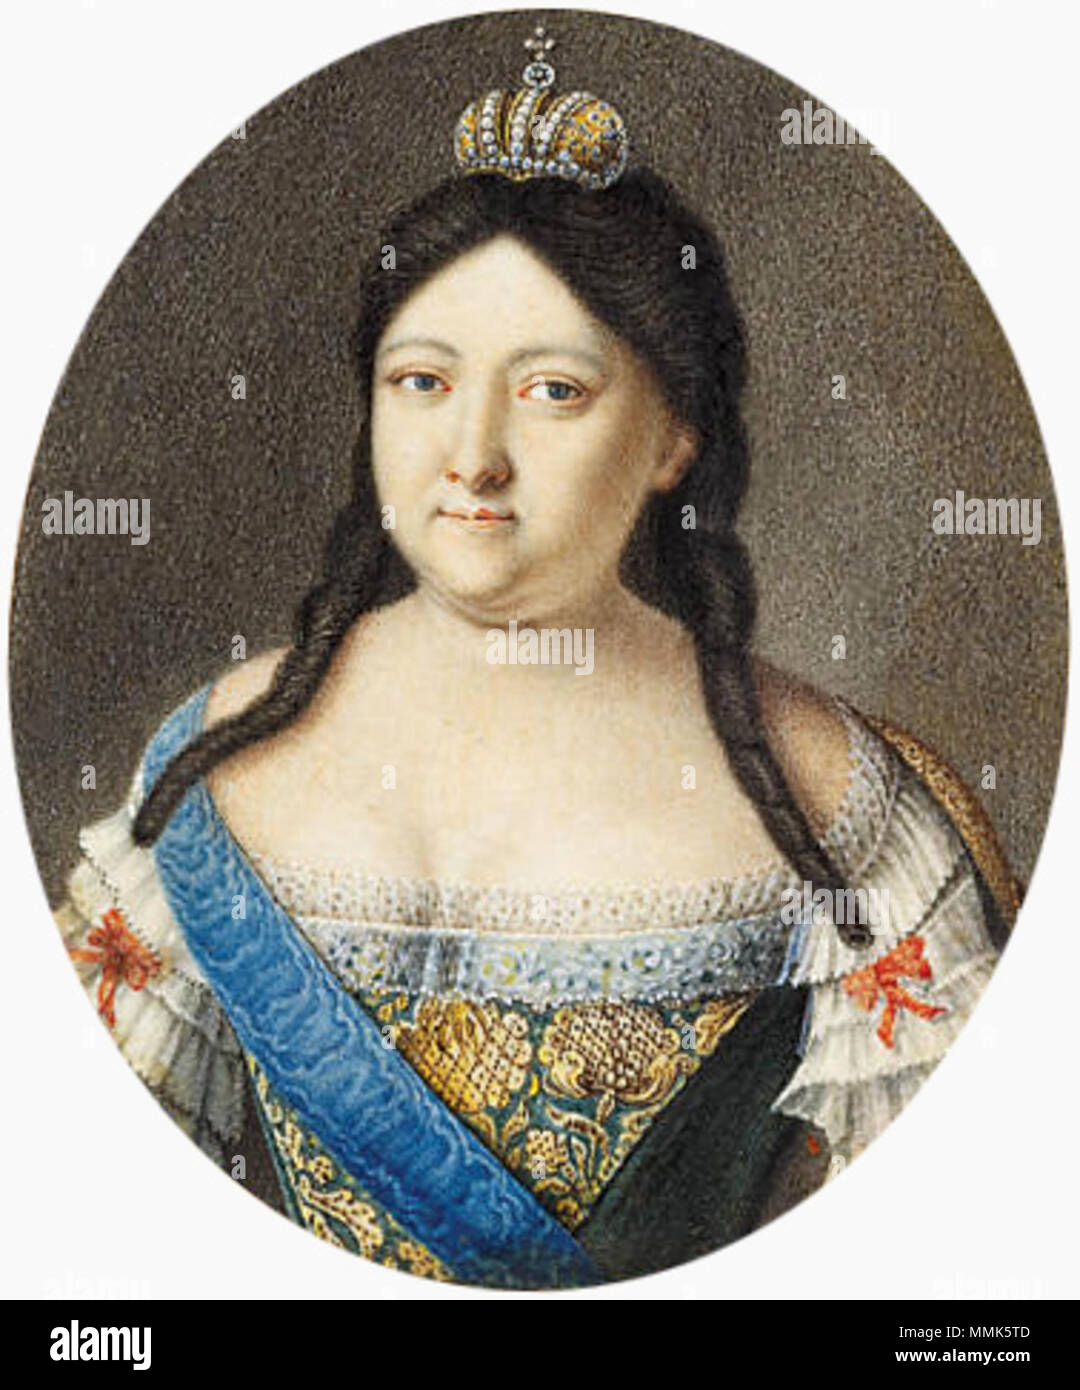 . English: RUSSIAN SCHOOL, CIRCA 1730 Empress Anna Ioannovna (1693-1740), in blue dress with yellow floral-embroidered bodice, red bows on her tiered lace sleeves, wearing the blue moiré sash of the Imperial Russian Order of St. Andrew, a miniature gold and pearl crown on her long dark hair.   . circa 1730.   Anonymous Russian painter (1670s-1917) Public domain image (according to PD-RusEmpire) Anna Ioannovna portrait miniature 2 Stock Photo